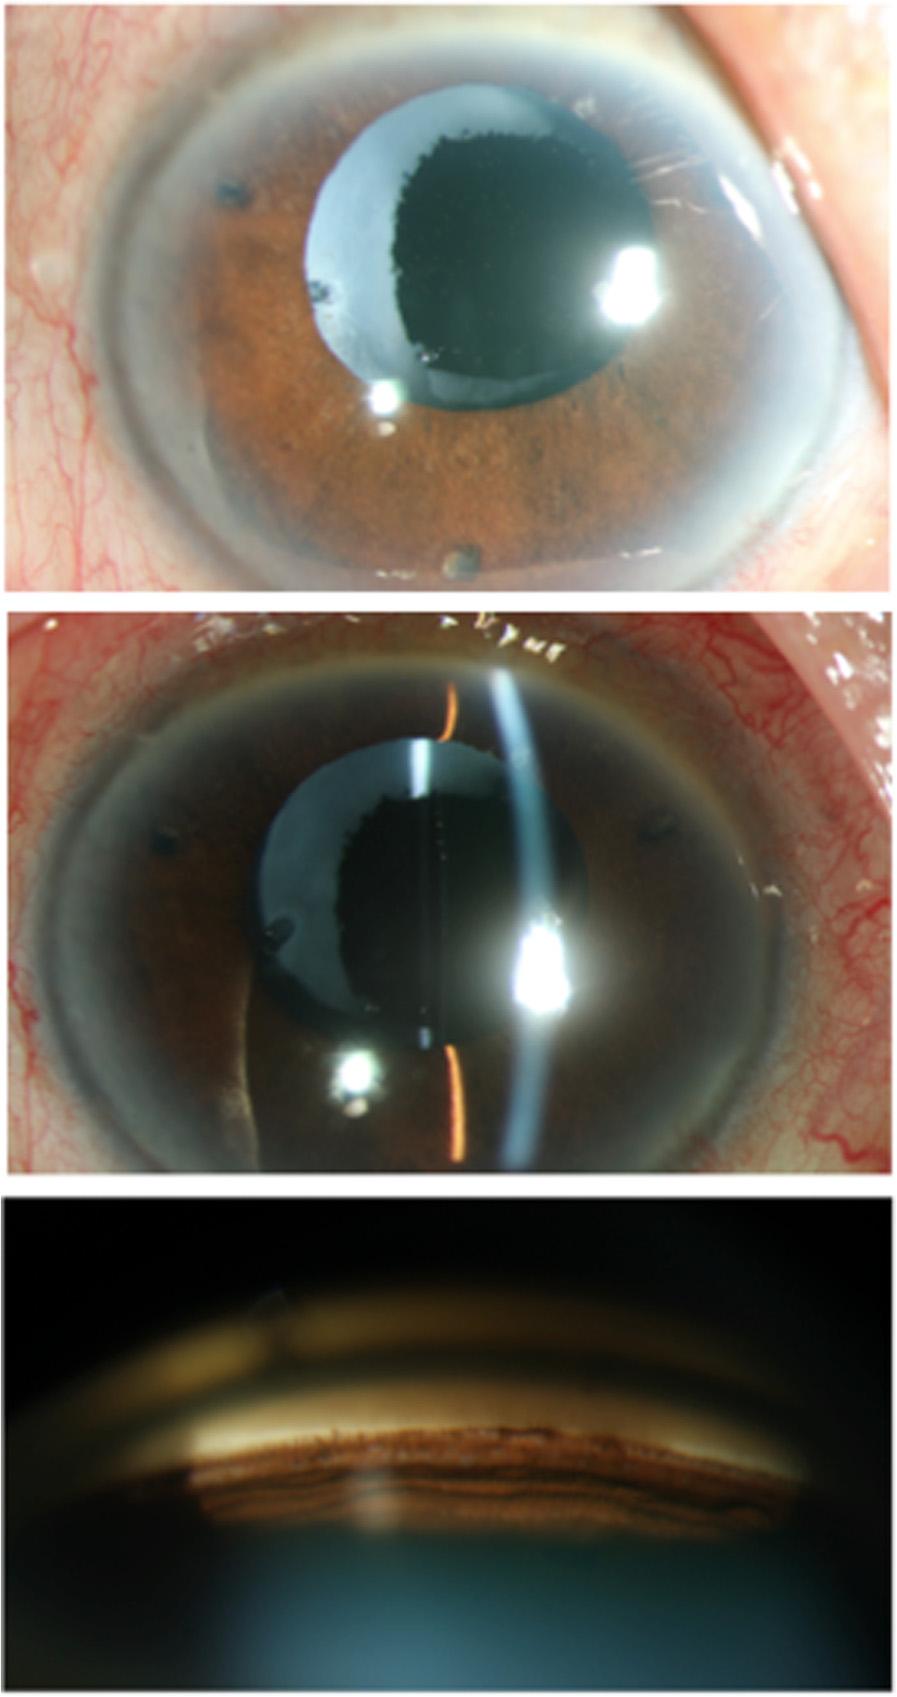 Suwan et al. BMC Ophthalmology (2016) 16:91 Page 3 of 6 Fig. 4 Before laser treatment. a Shallow both central and peripheral anterior chamber. b, c Gonioscopy shows peripheral anterior synechiae.